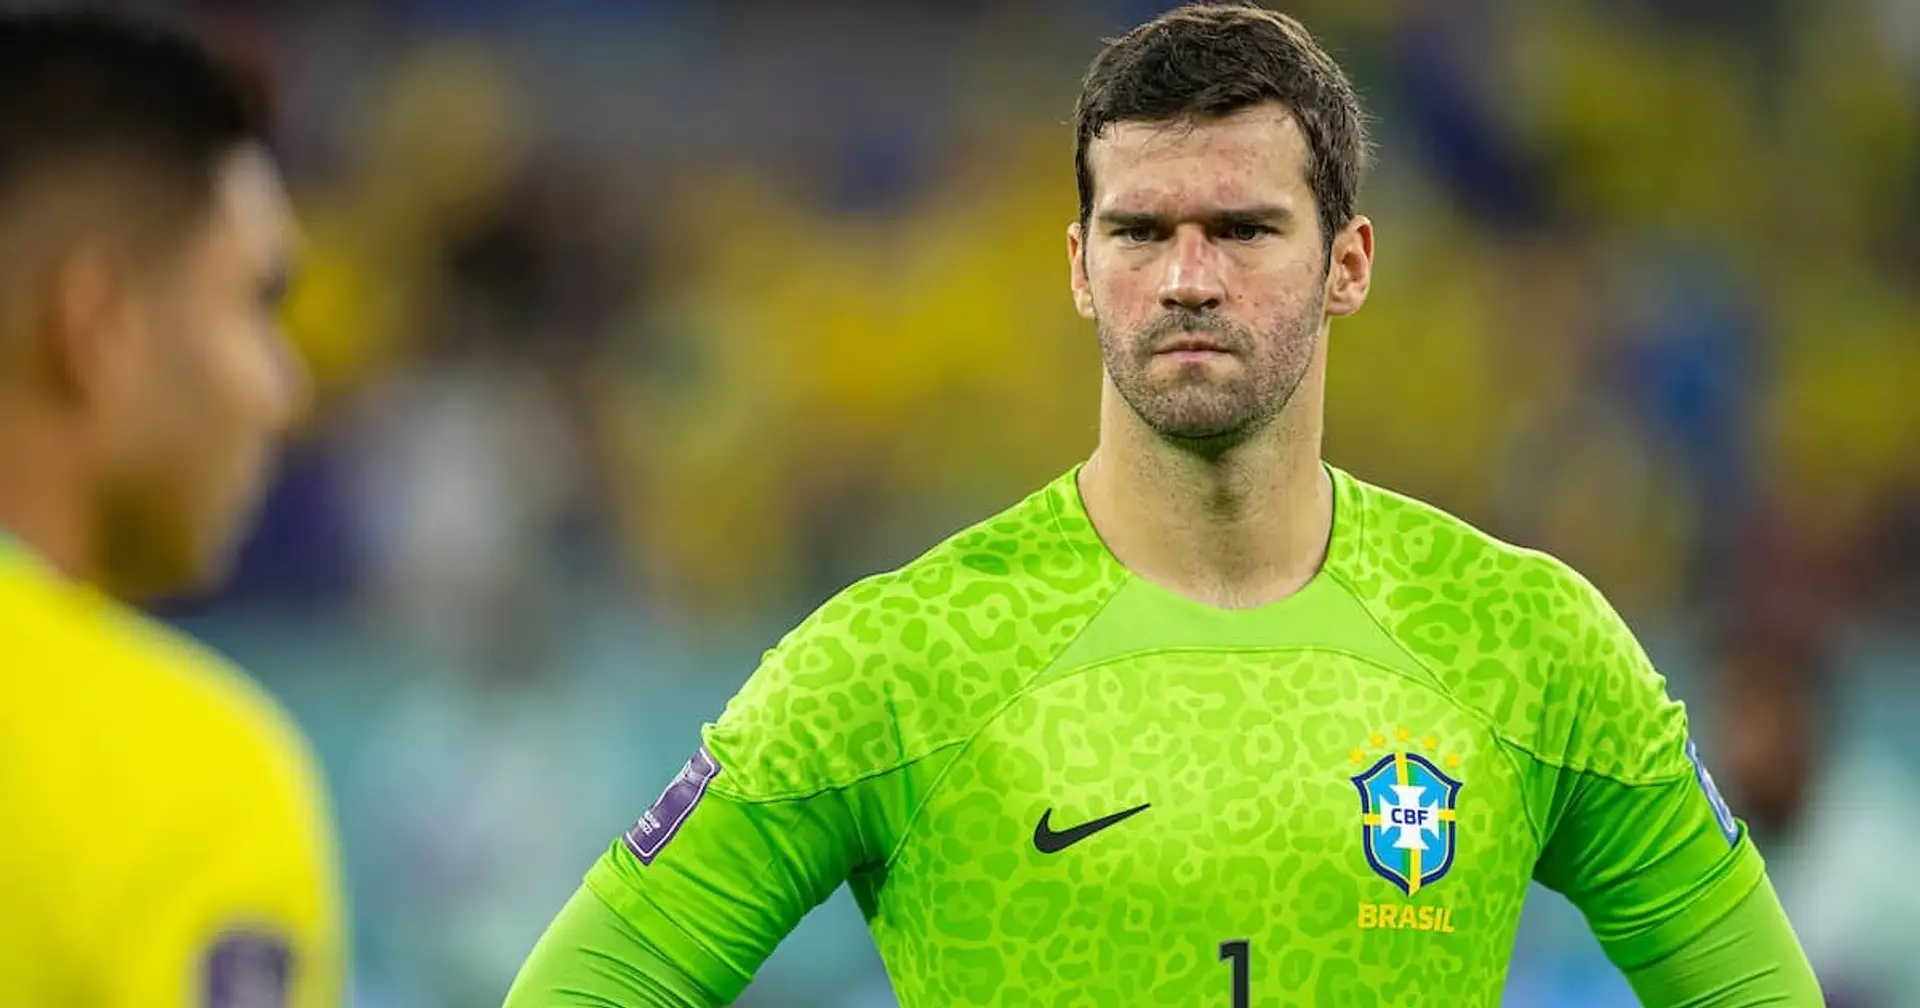 Alisson left out of both Brazil matches in international break – head coach explains his decision